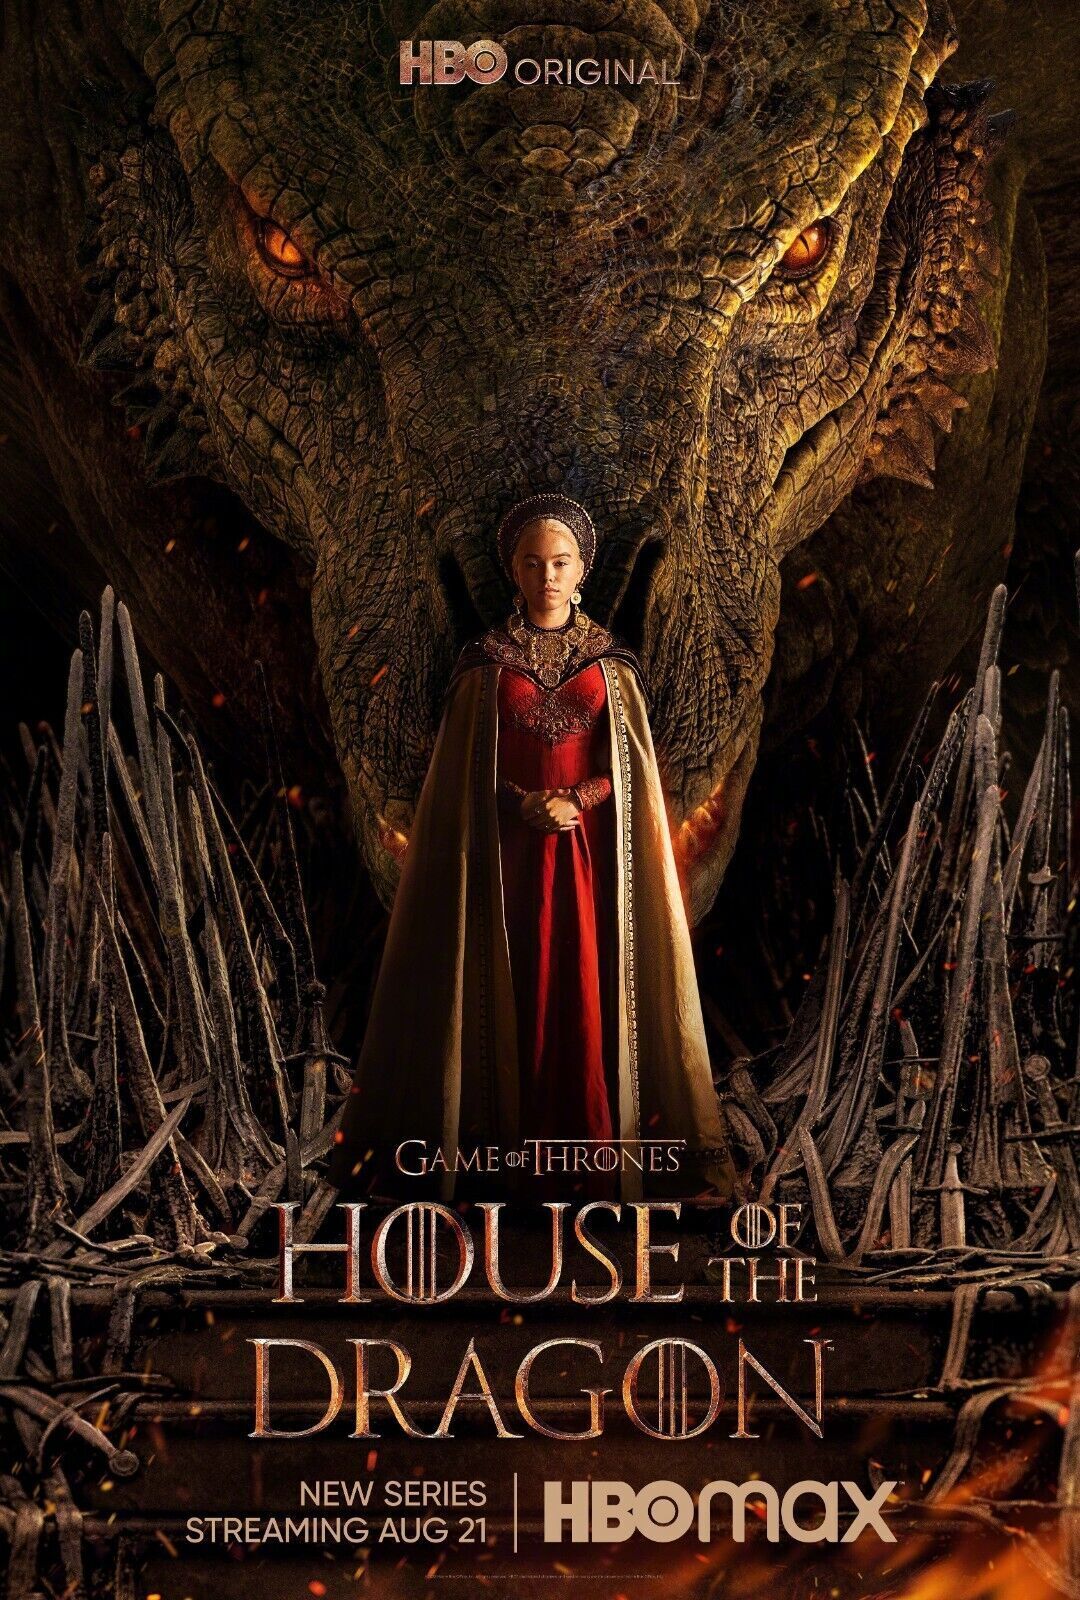 When and Where to Watch House of the Dragon Season 2 Premiere